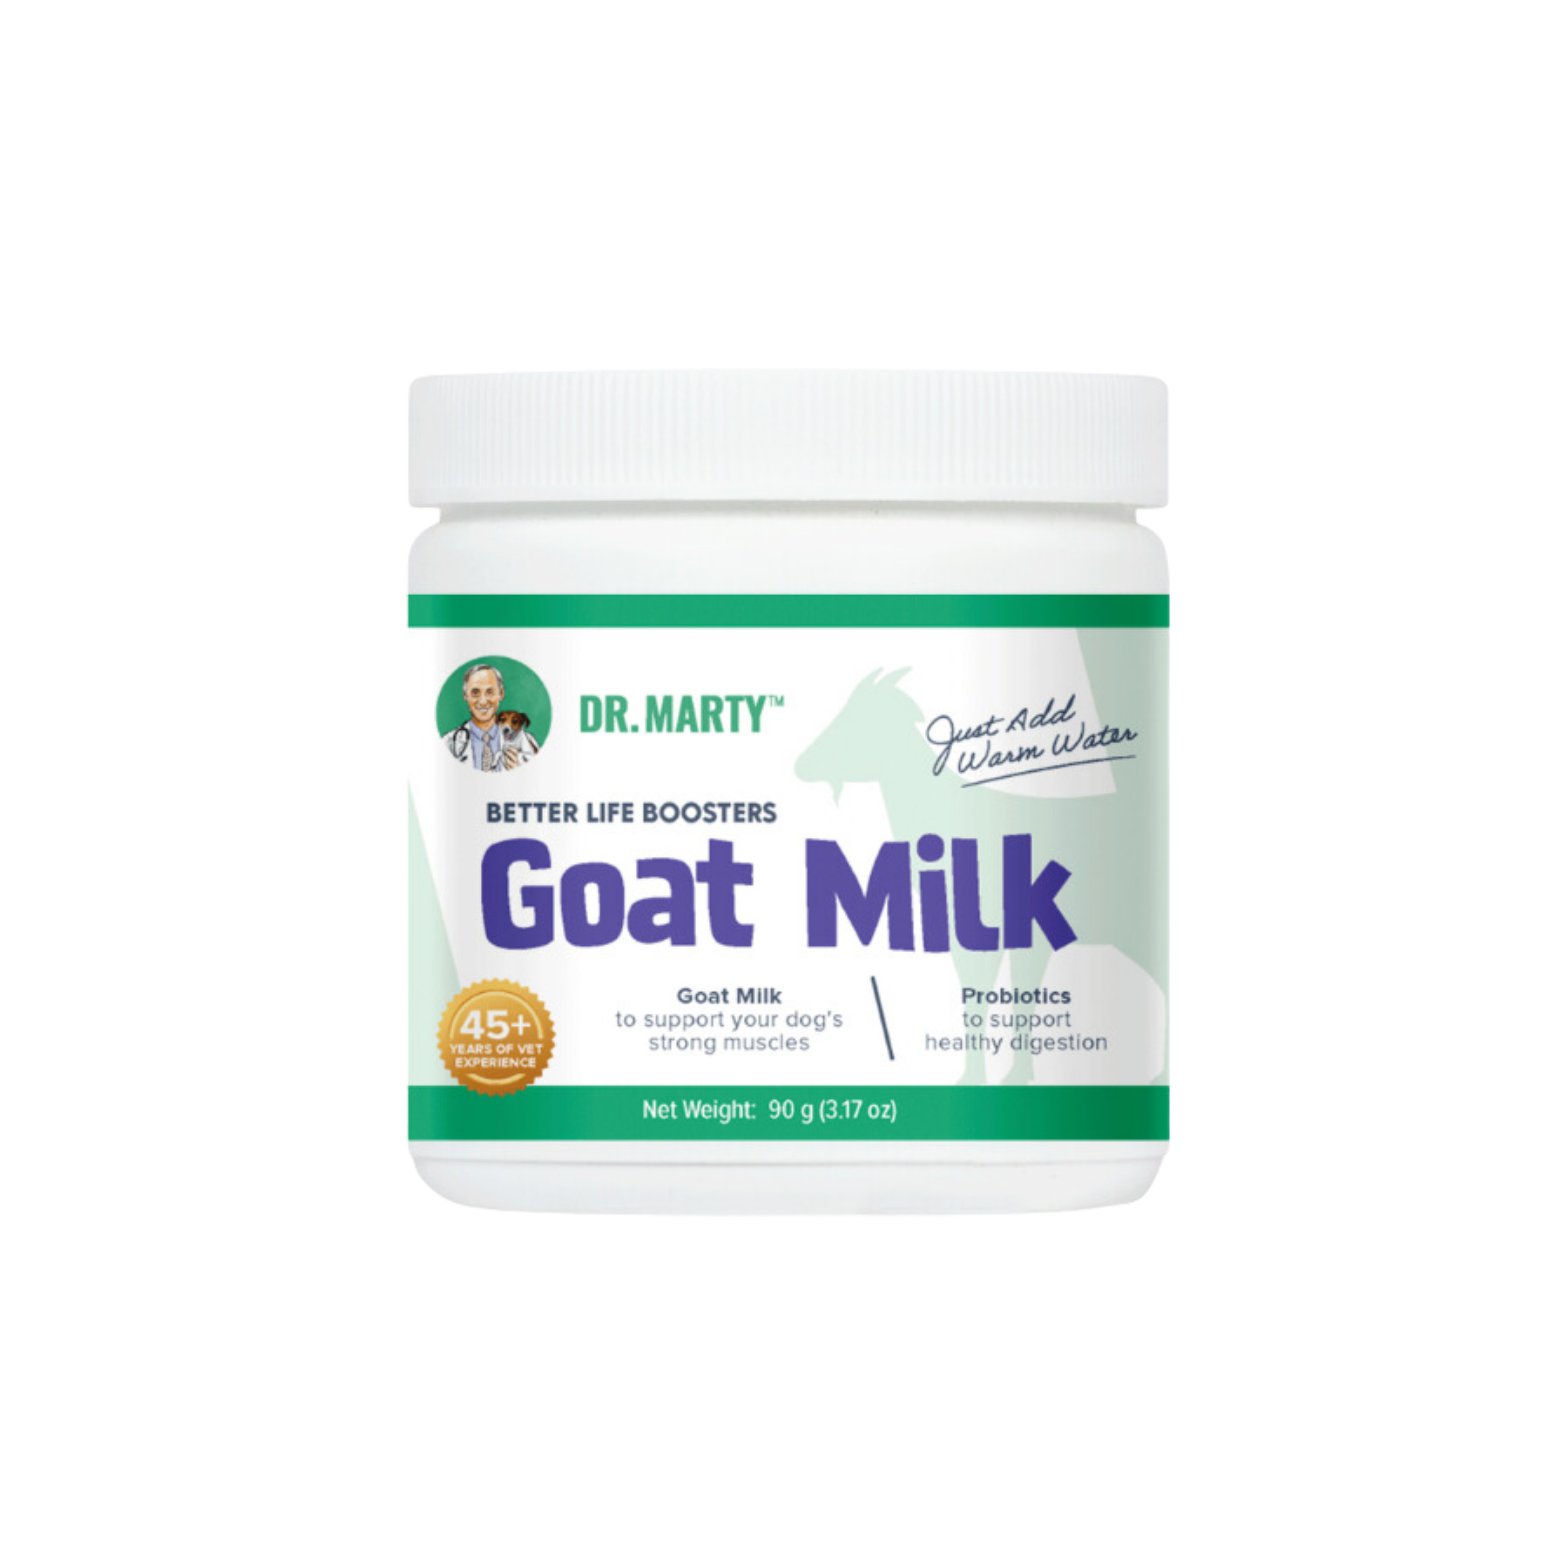 Dr Marty Supplement Dog Better Life Boosters Goat Milk Powder 3.17oz